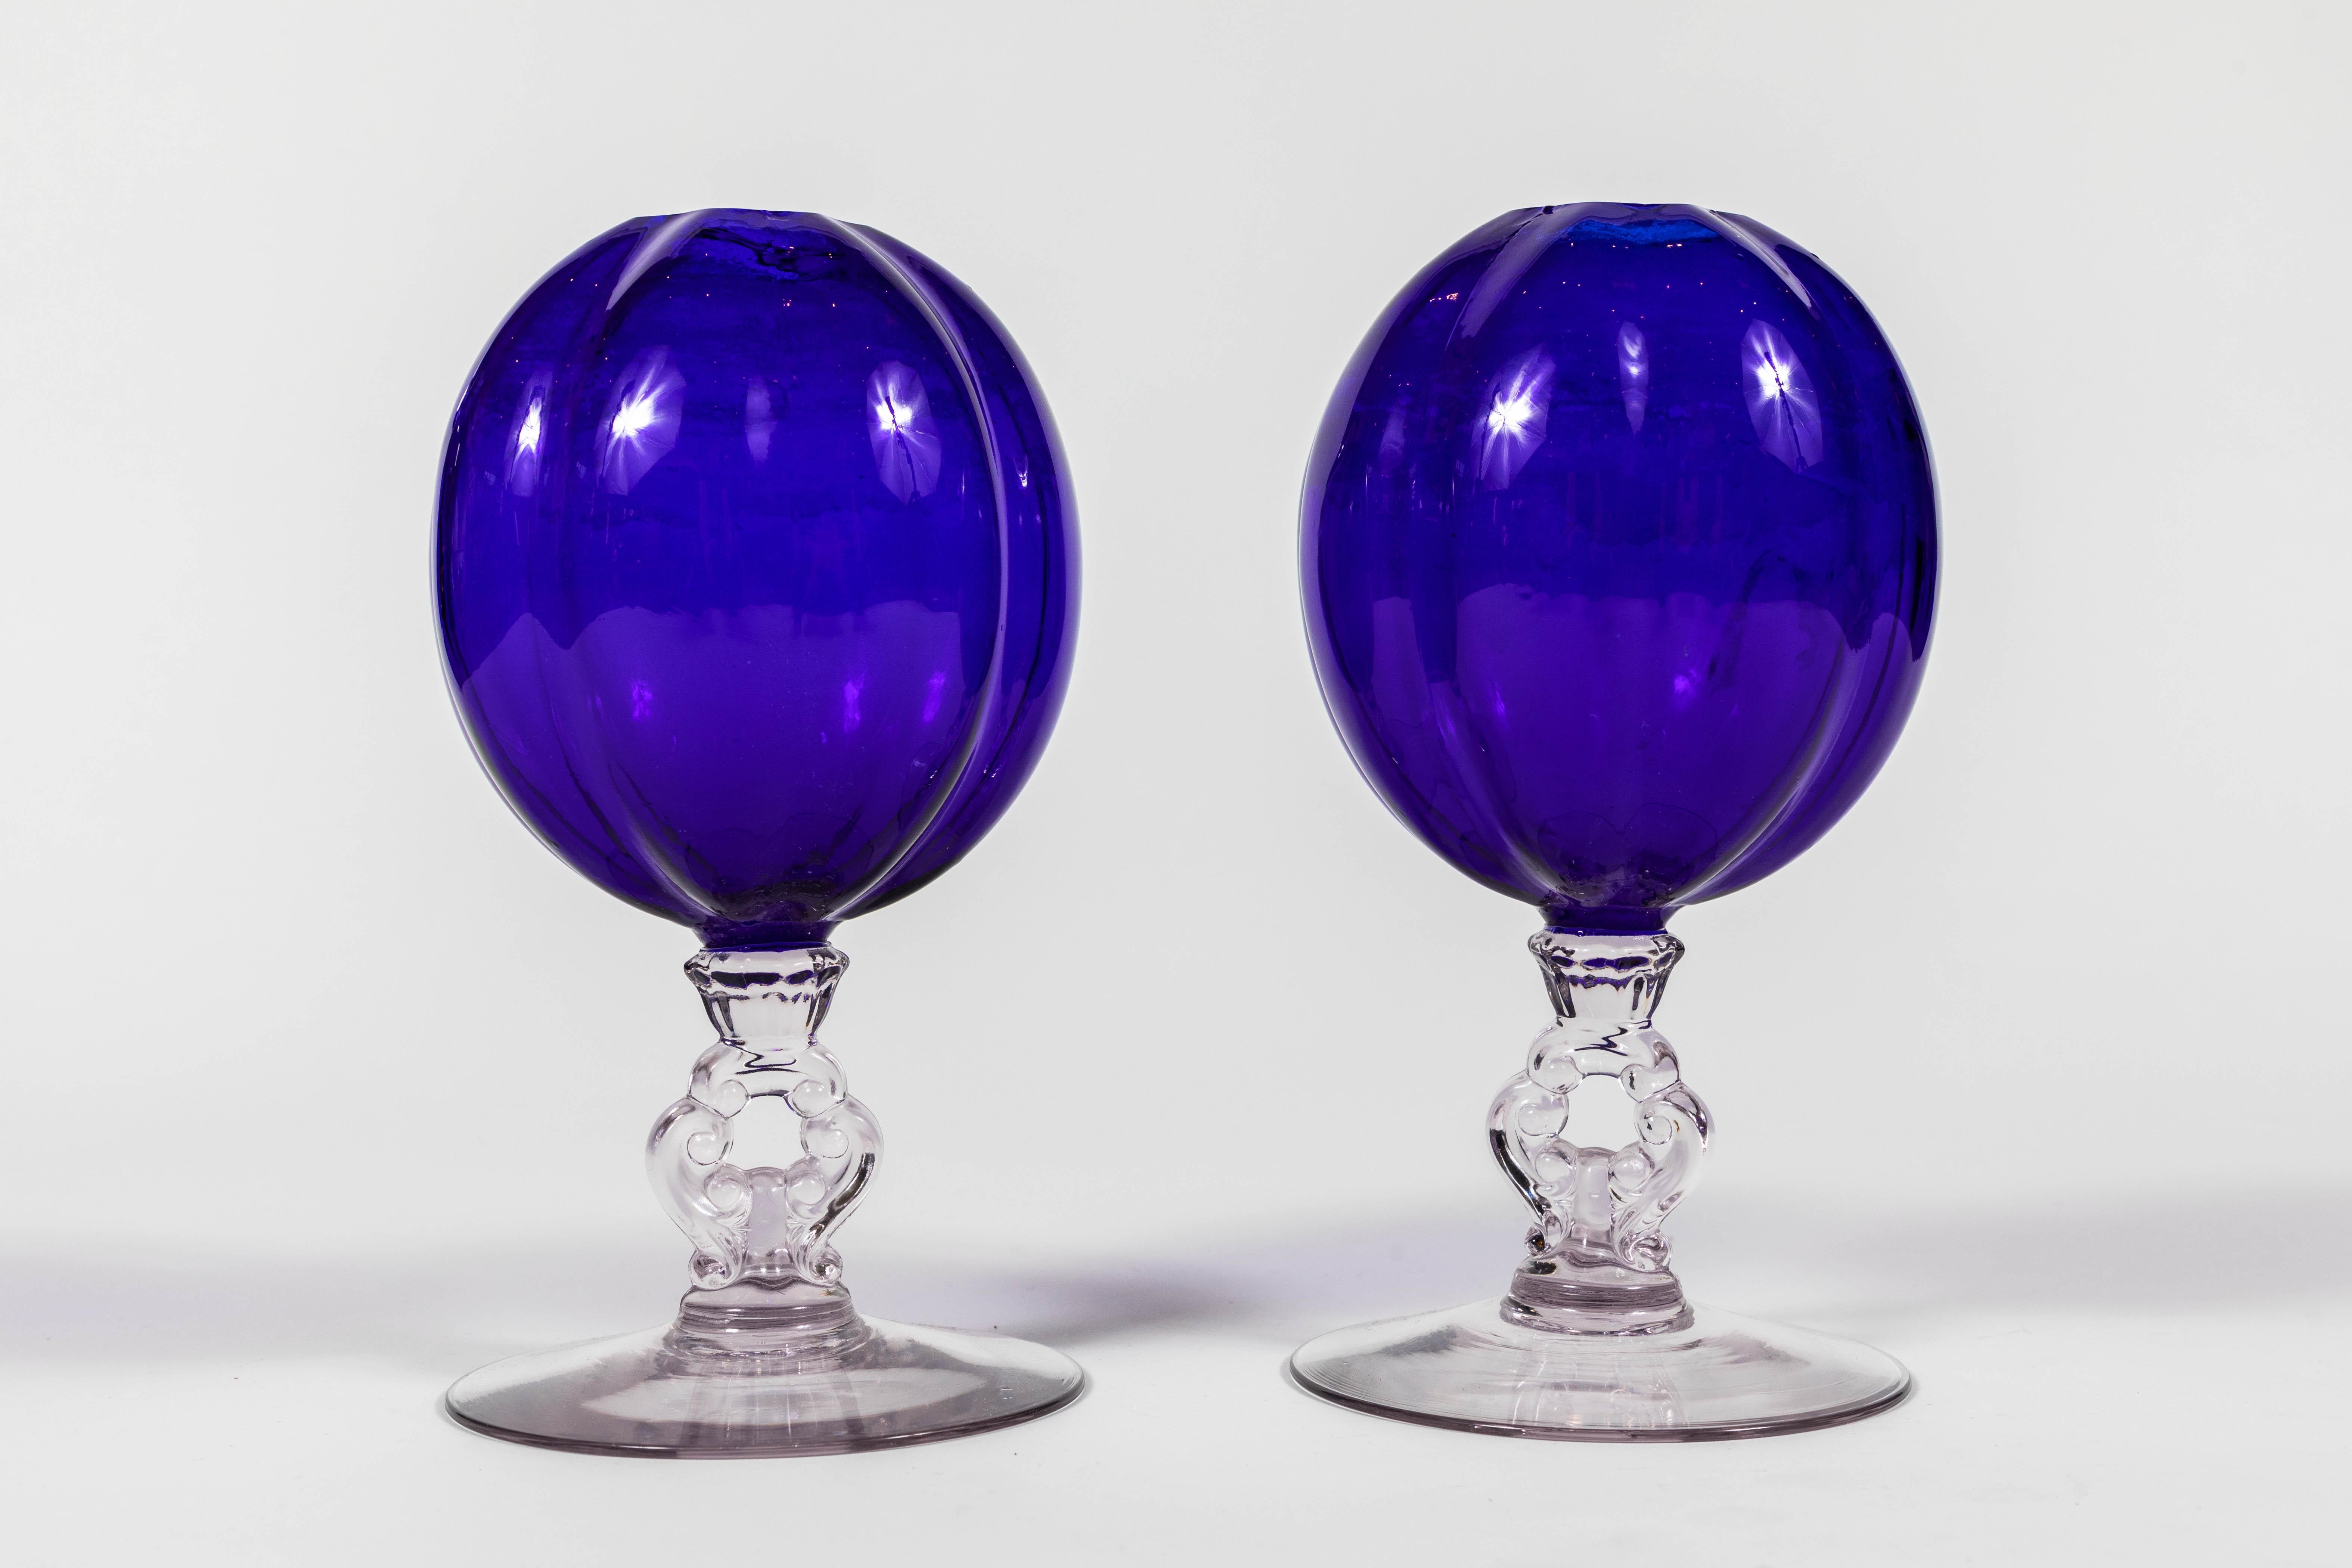 Pair of 1920s cobalt blue glass vases with clear glass stem and foot.